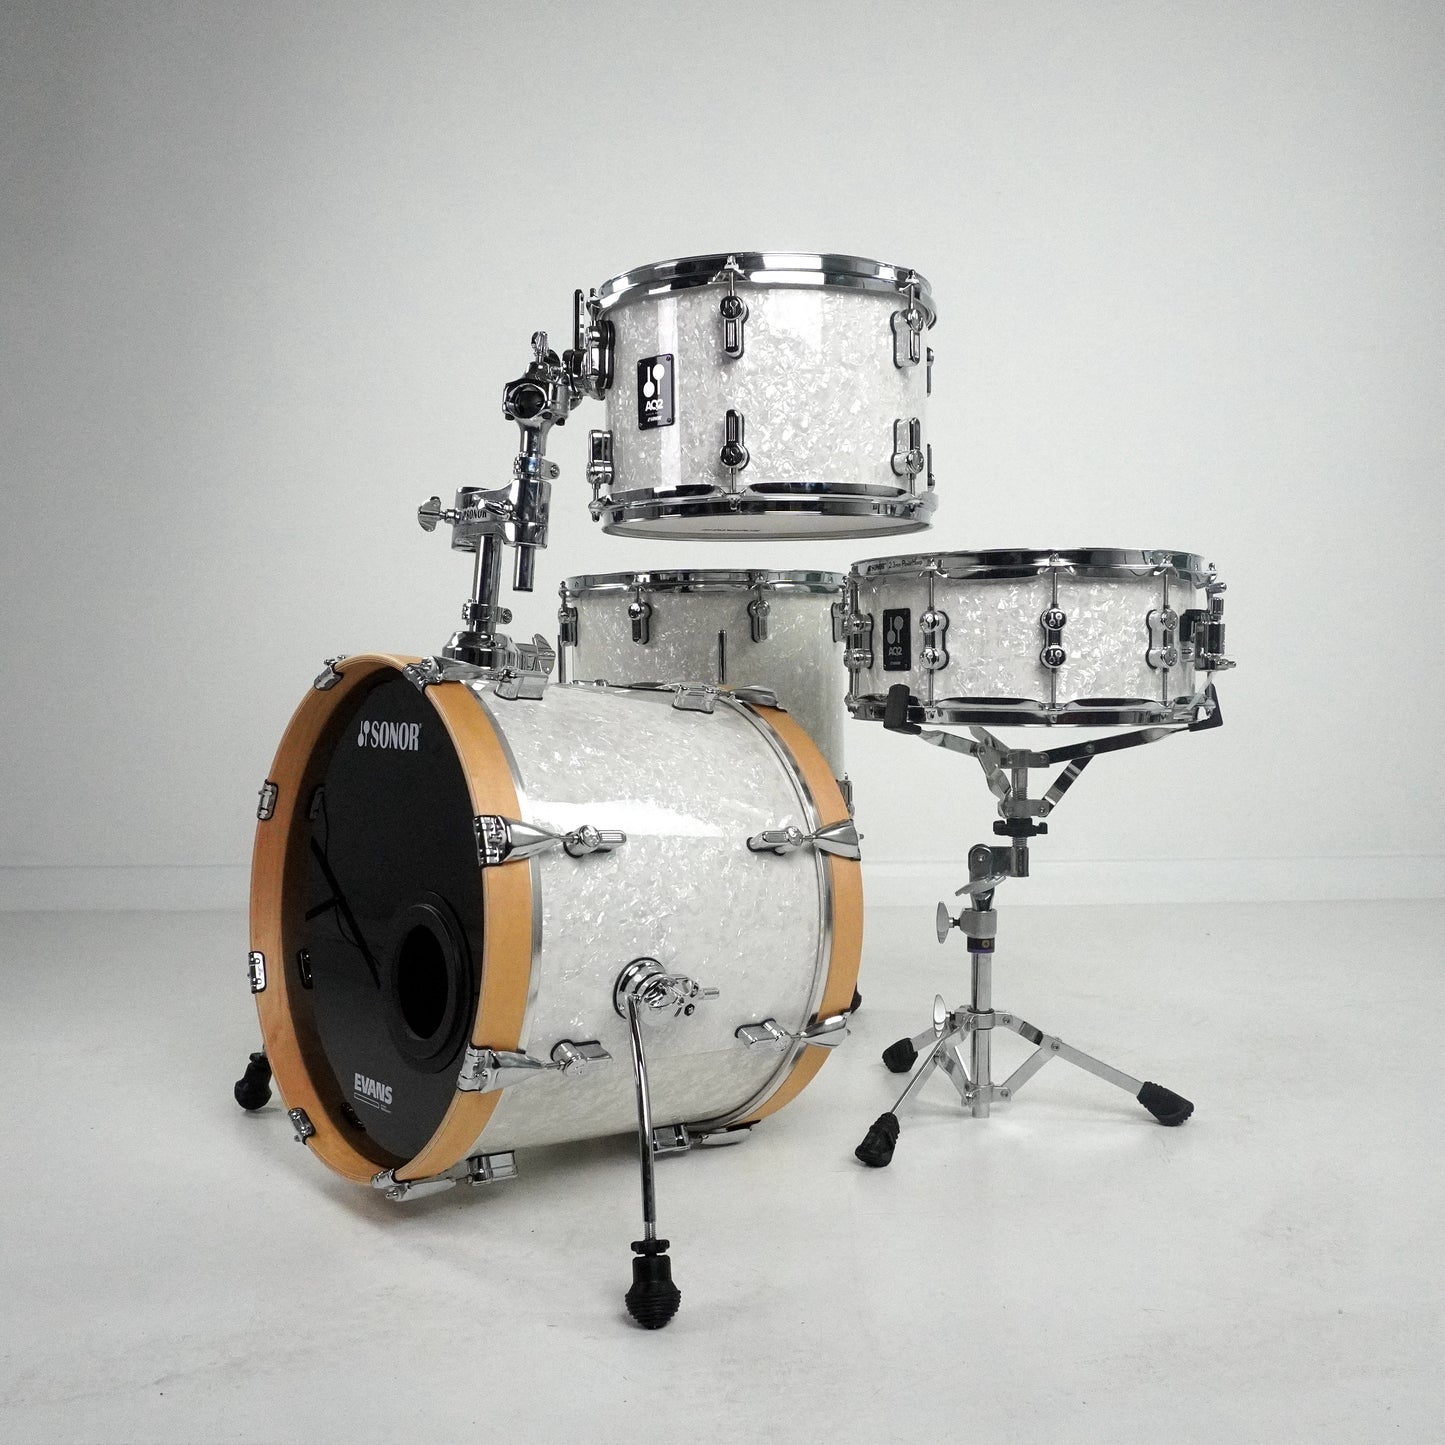 Sonor AQ2 4-piece Drum Kit in White Pearl